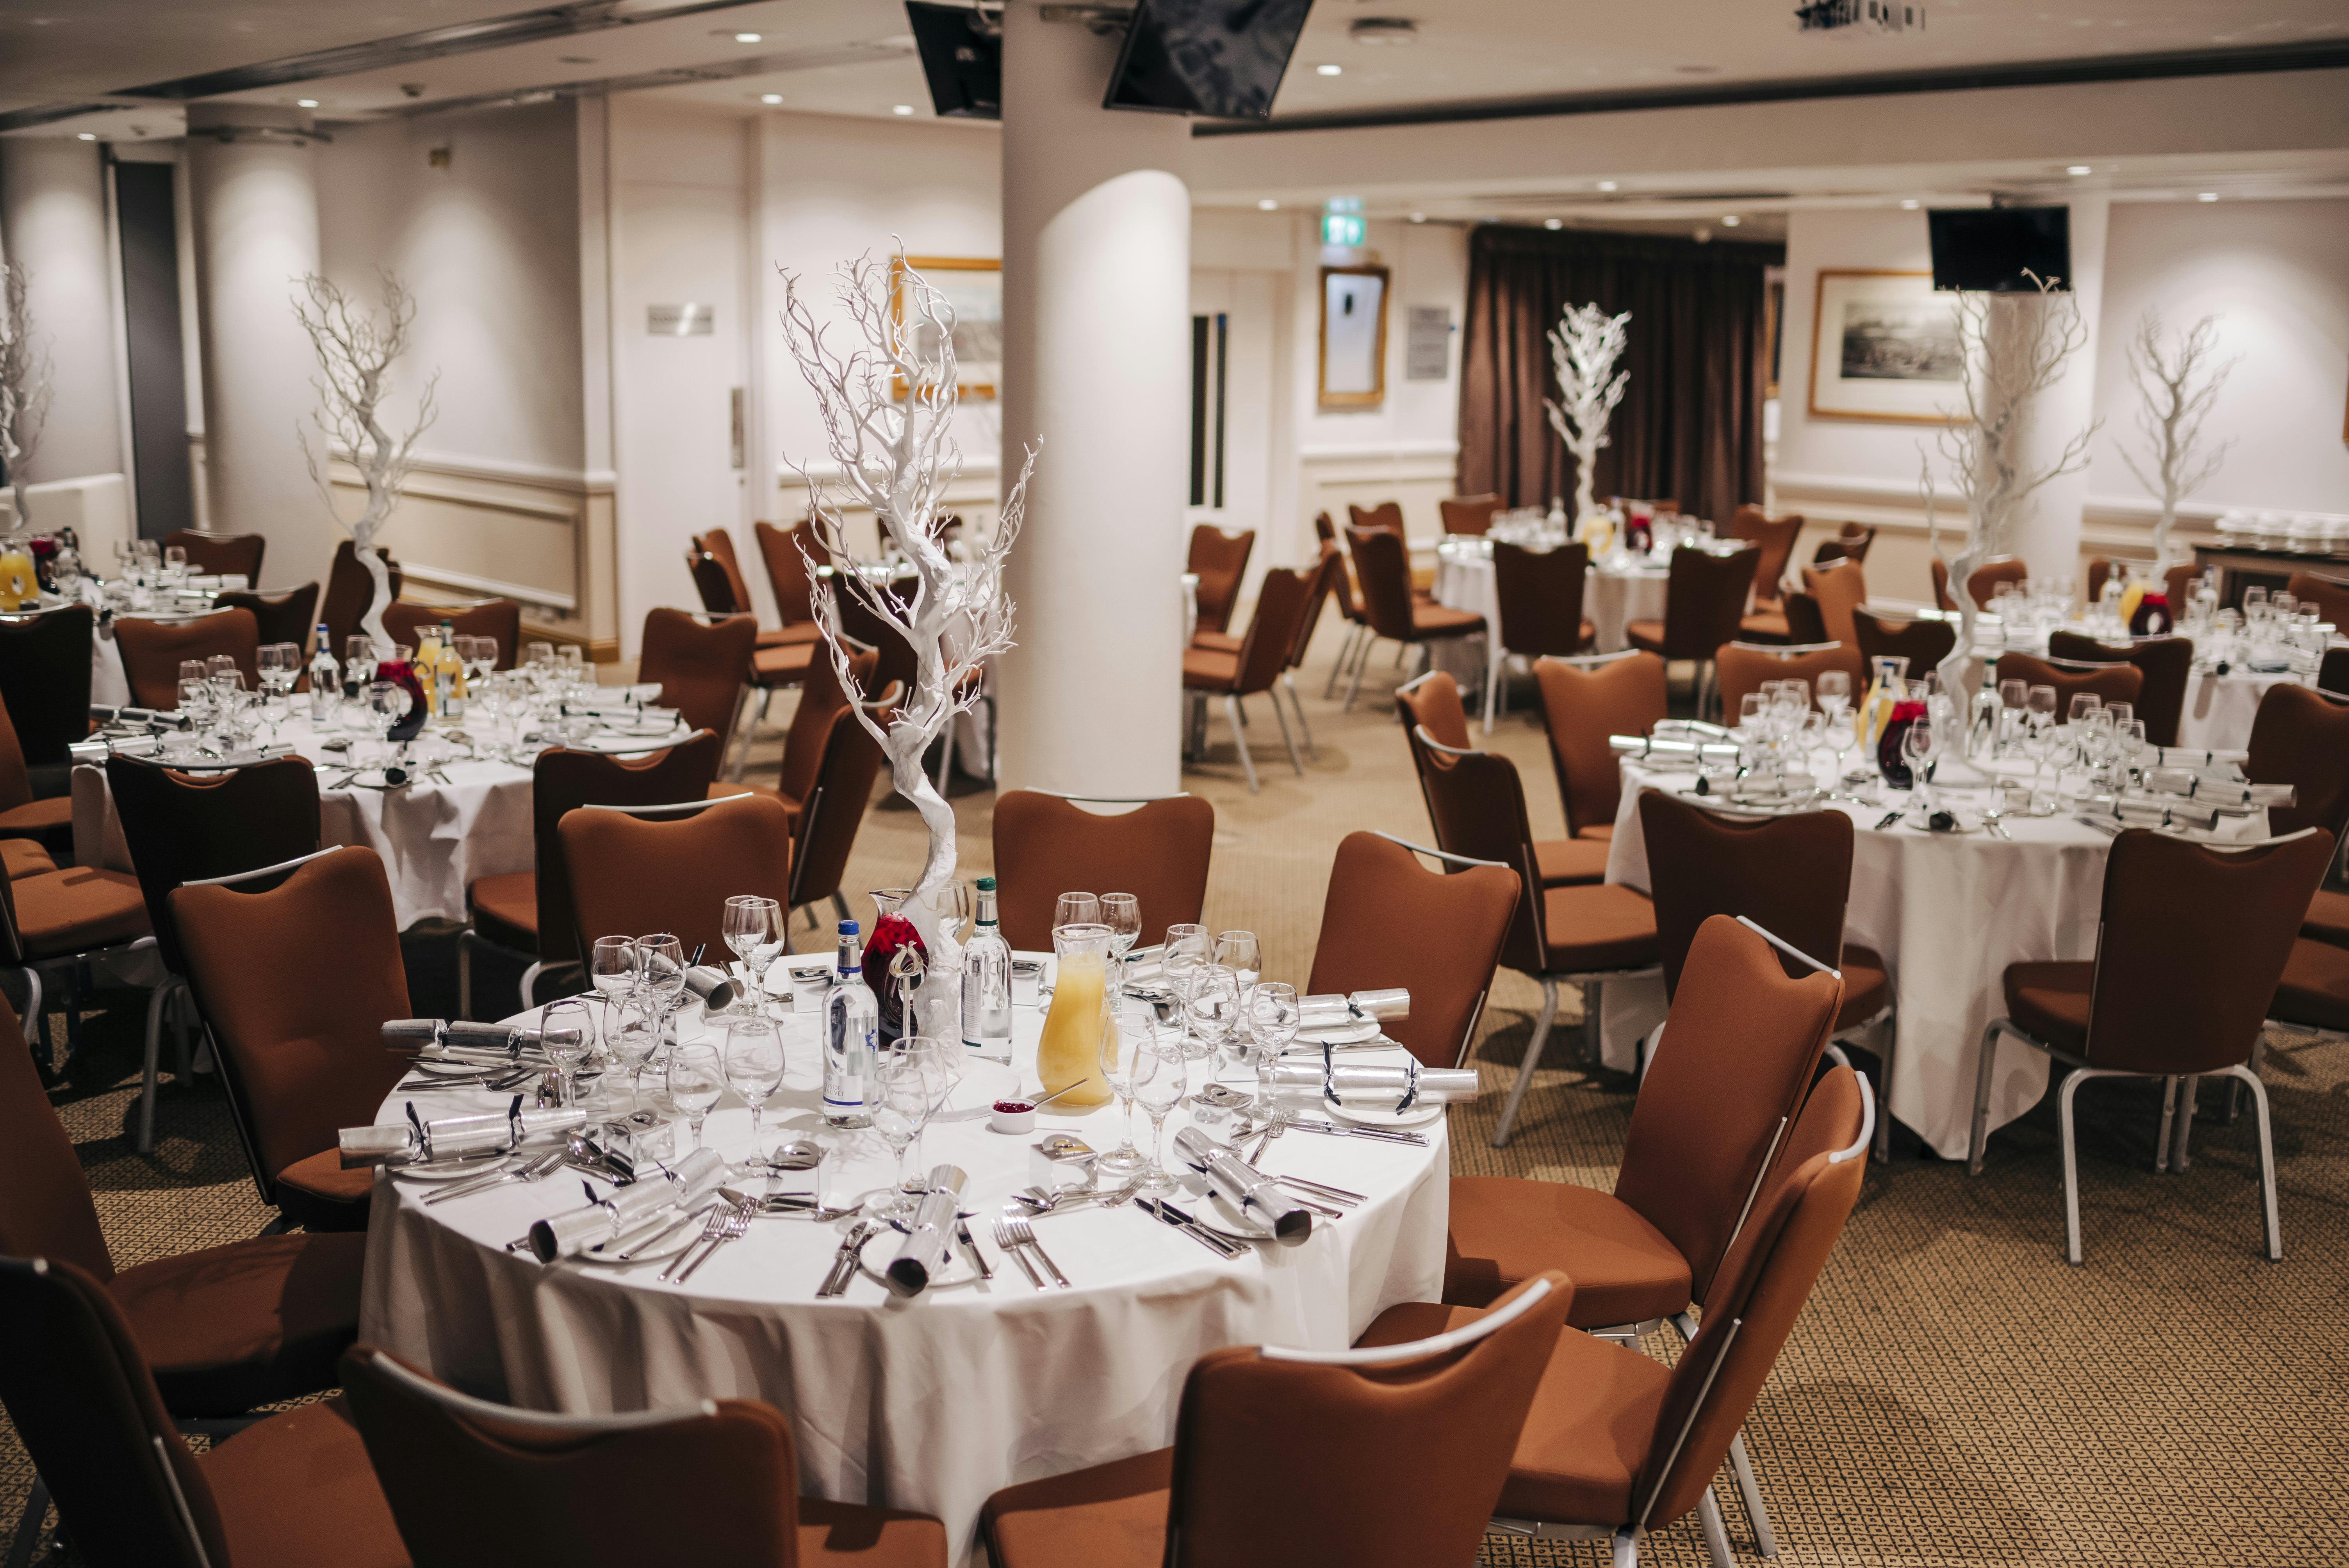 Team Away Day Ideas Venues in London - Epsom Downs Racecourse